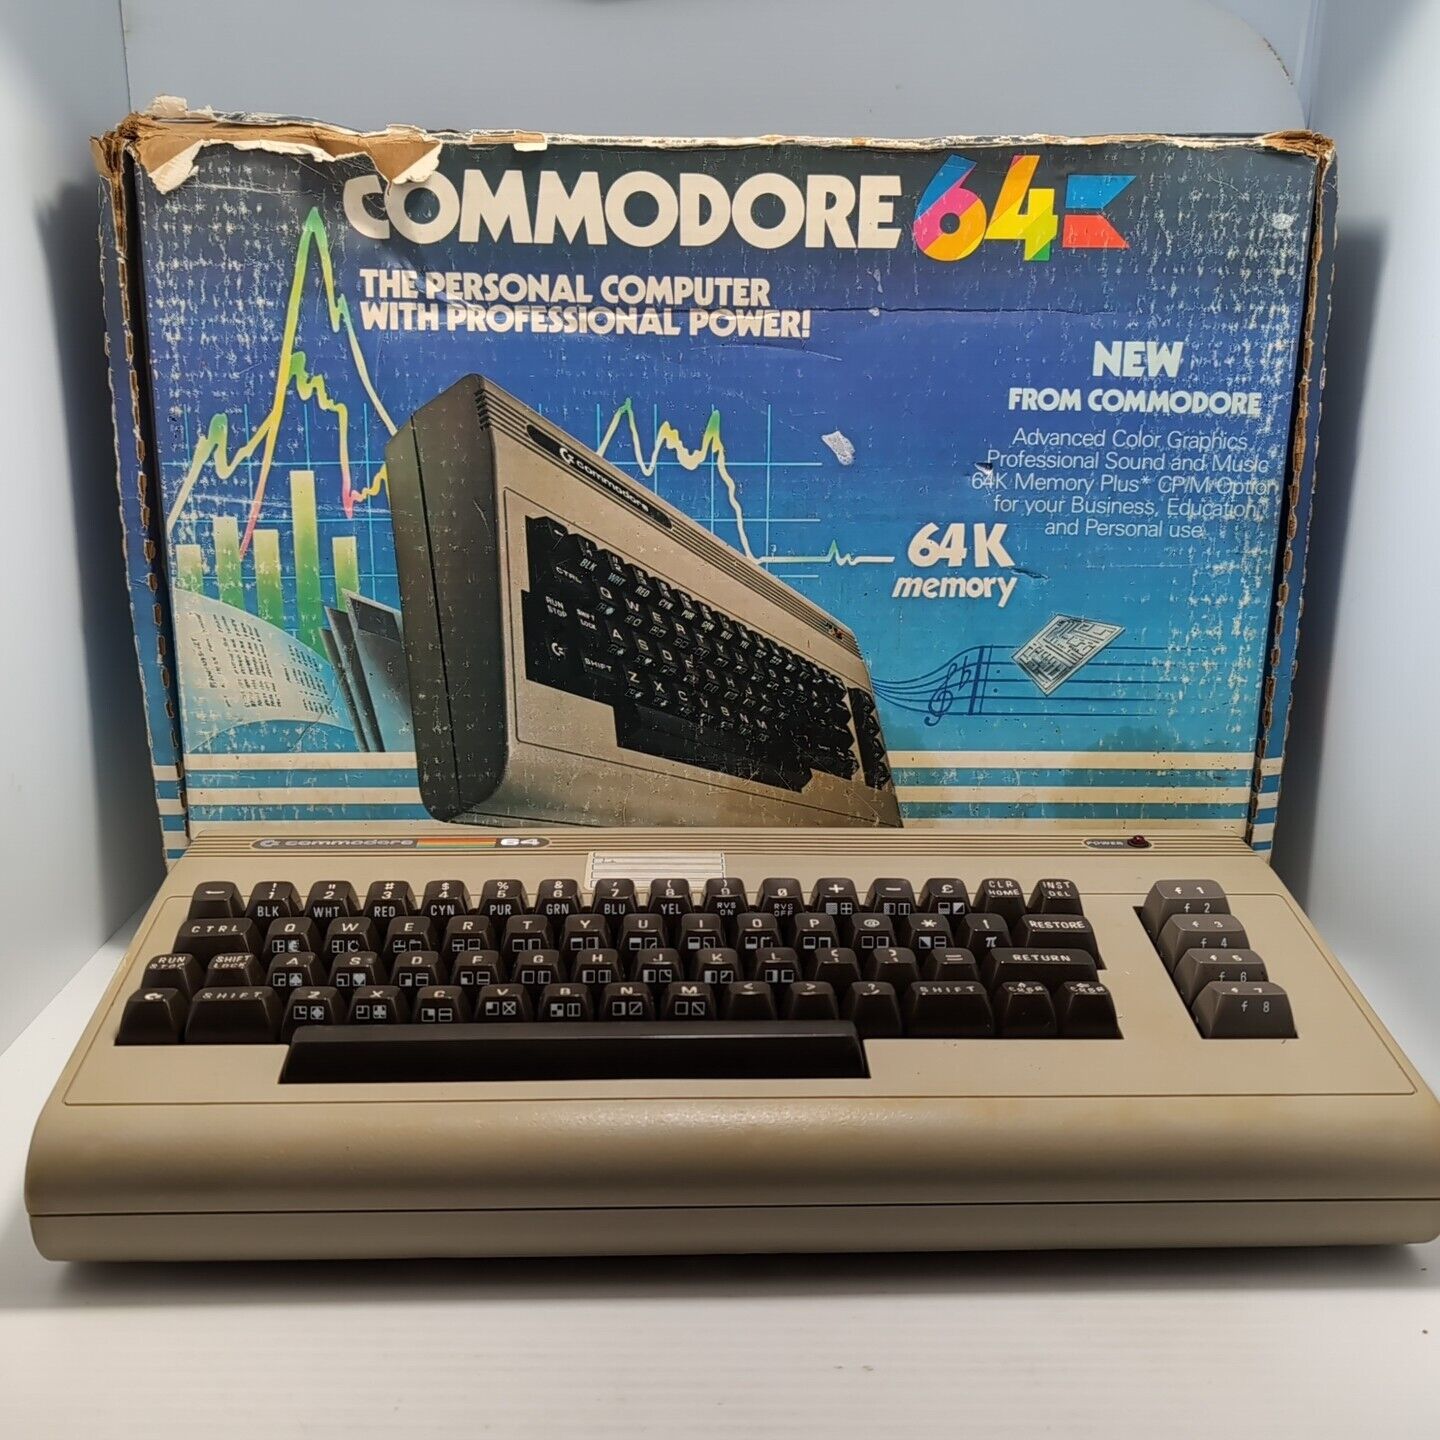 Vintage Commodore 64 Computer w/ Cord, User Guide, Software Untested - Powers ON